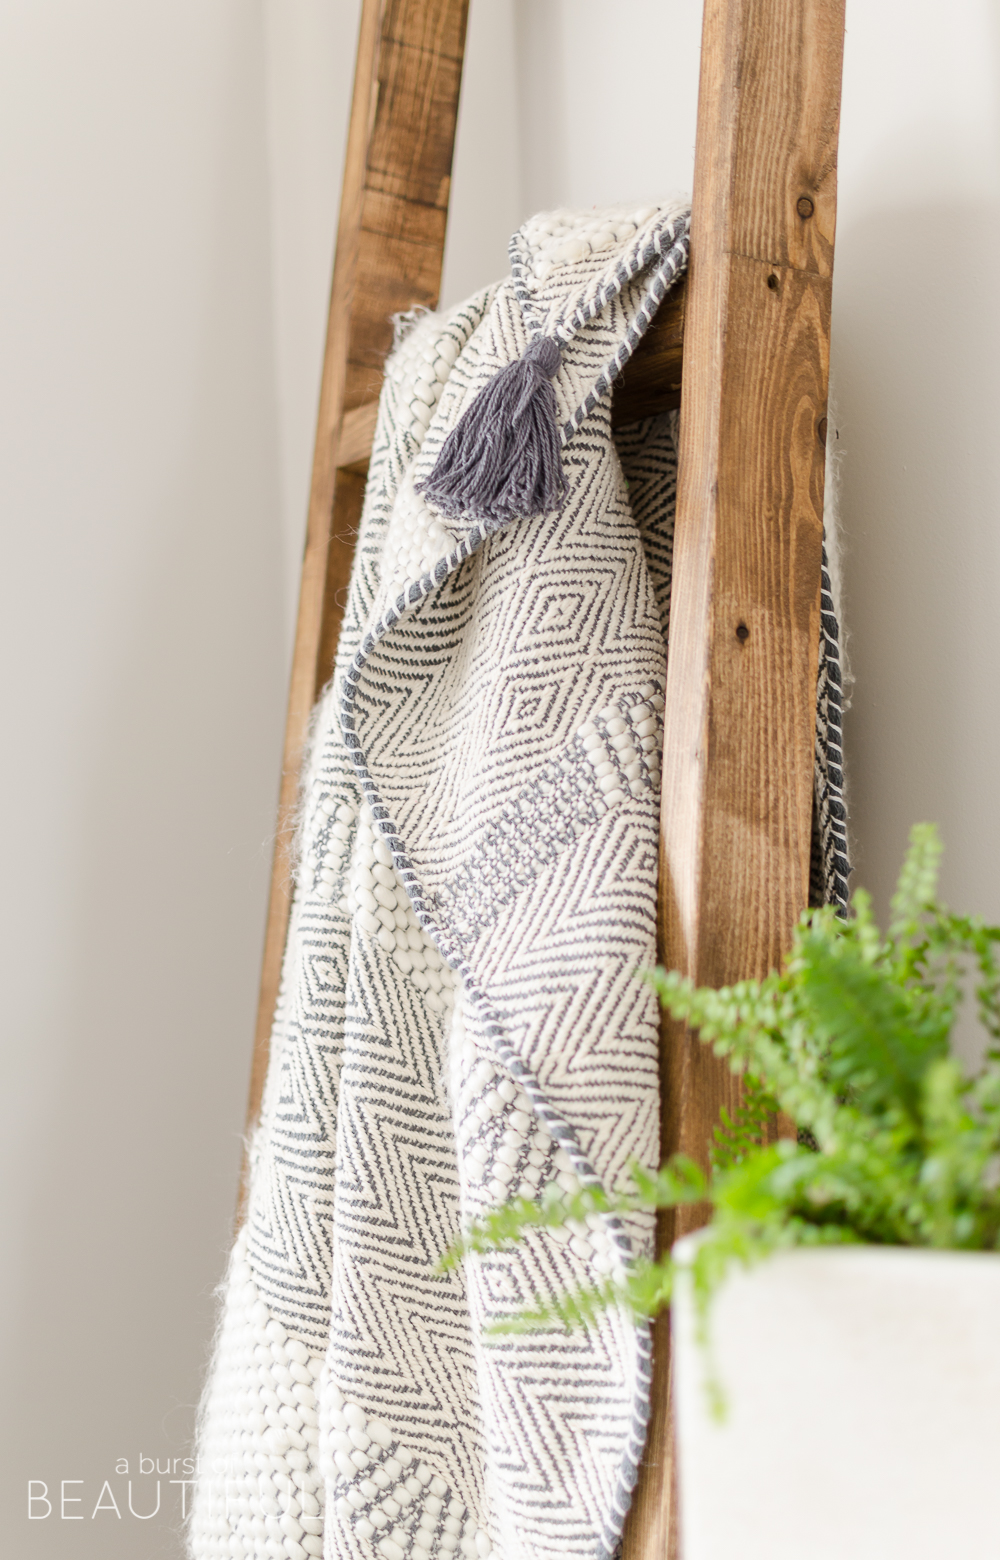 A simple DIY angled blanket ladder adds a touch of farmhouse charm to this cozy bedroom. 